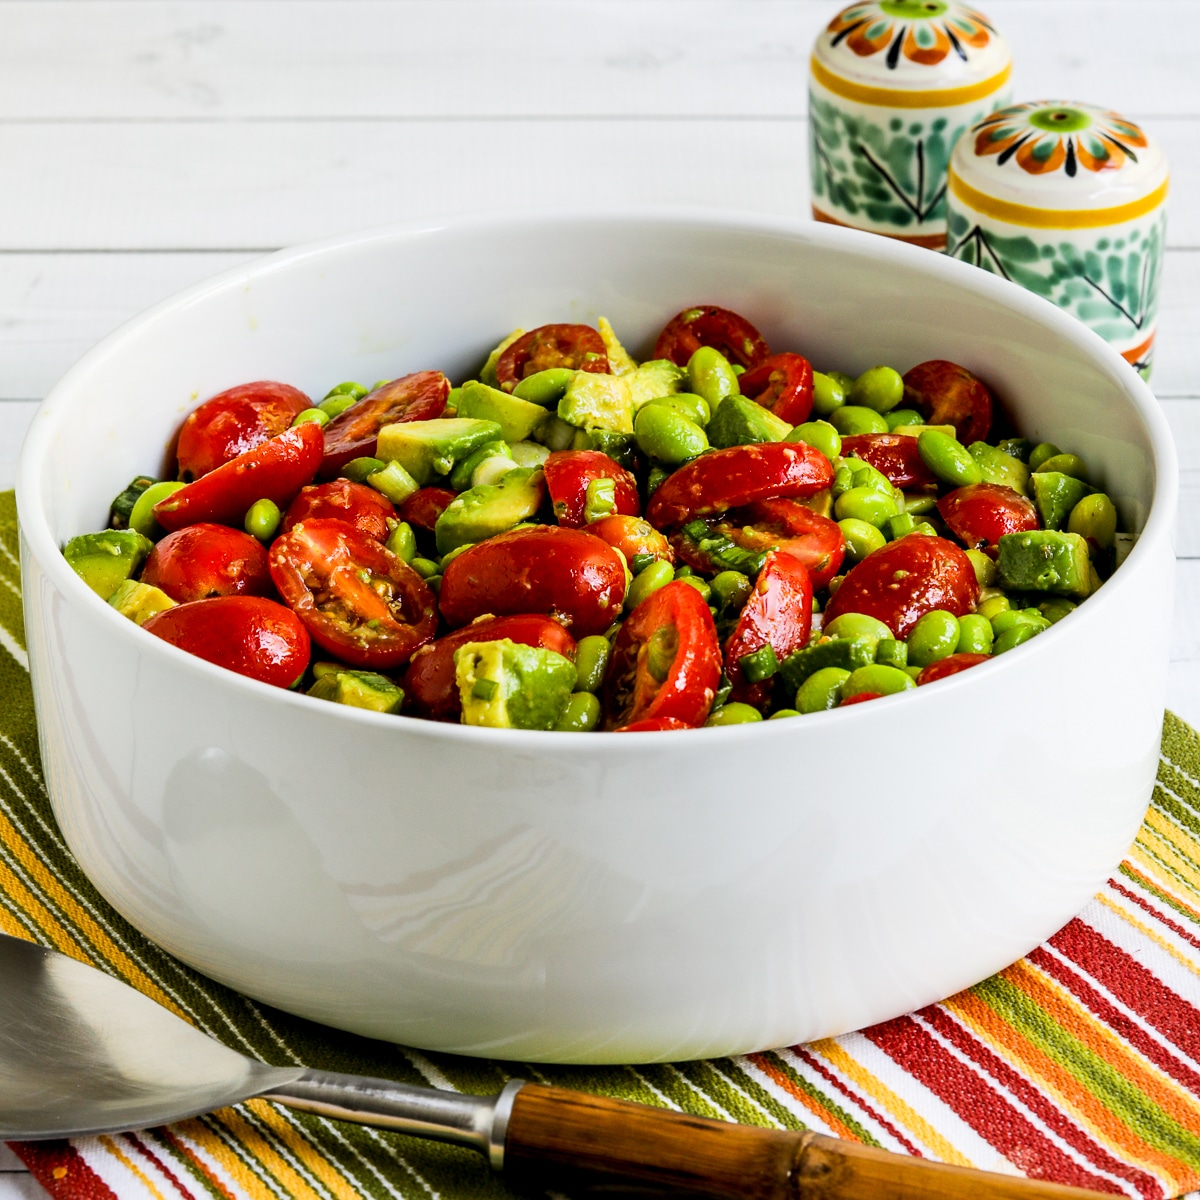 Square image for Tomato Avocado Salad with Edamame, shown in serving bowl.